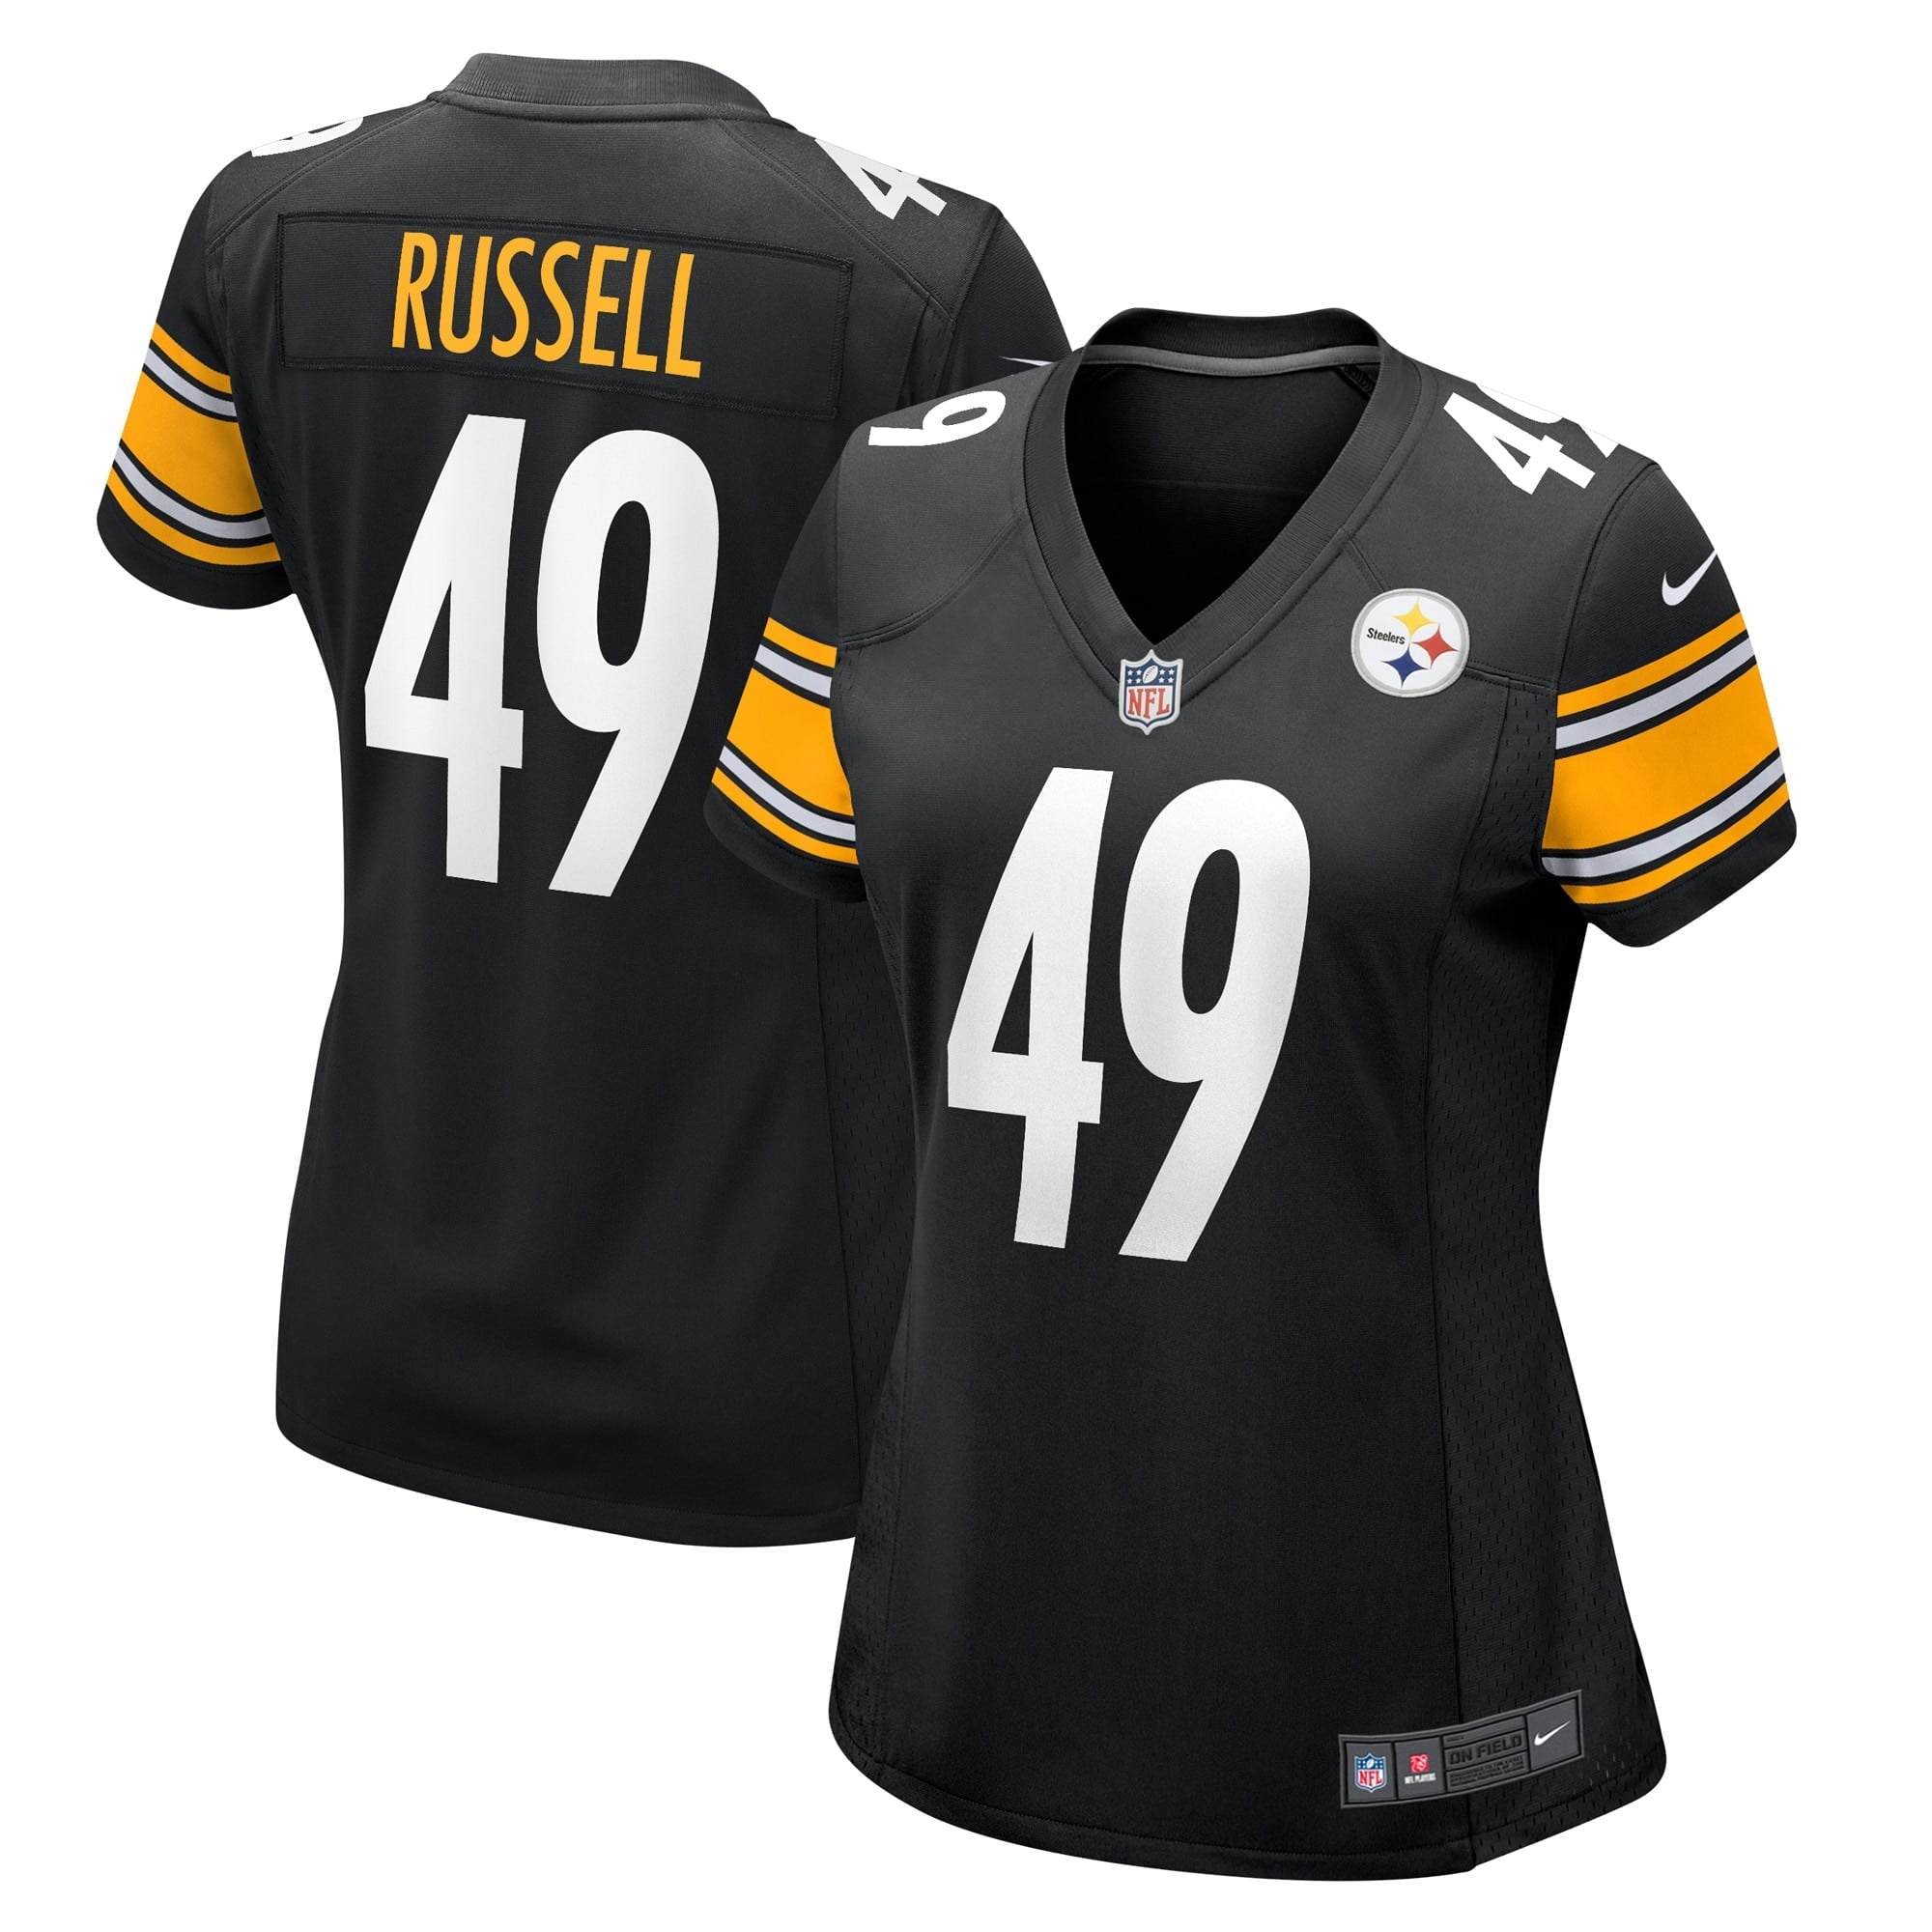 Russell Chapelle home jersey